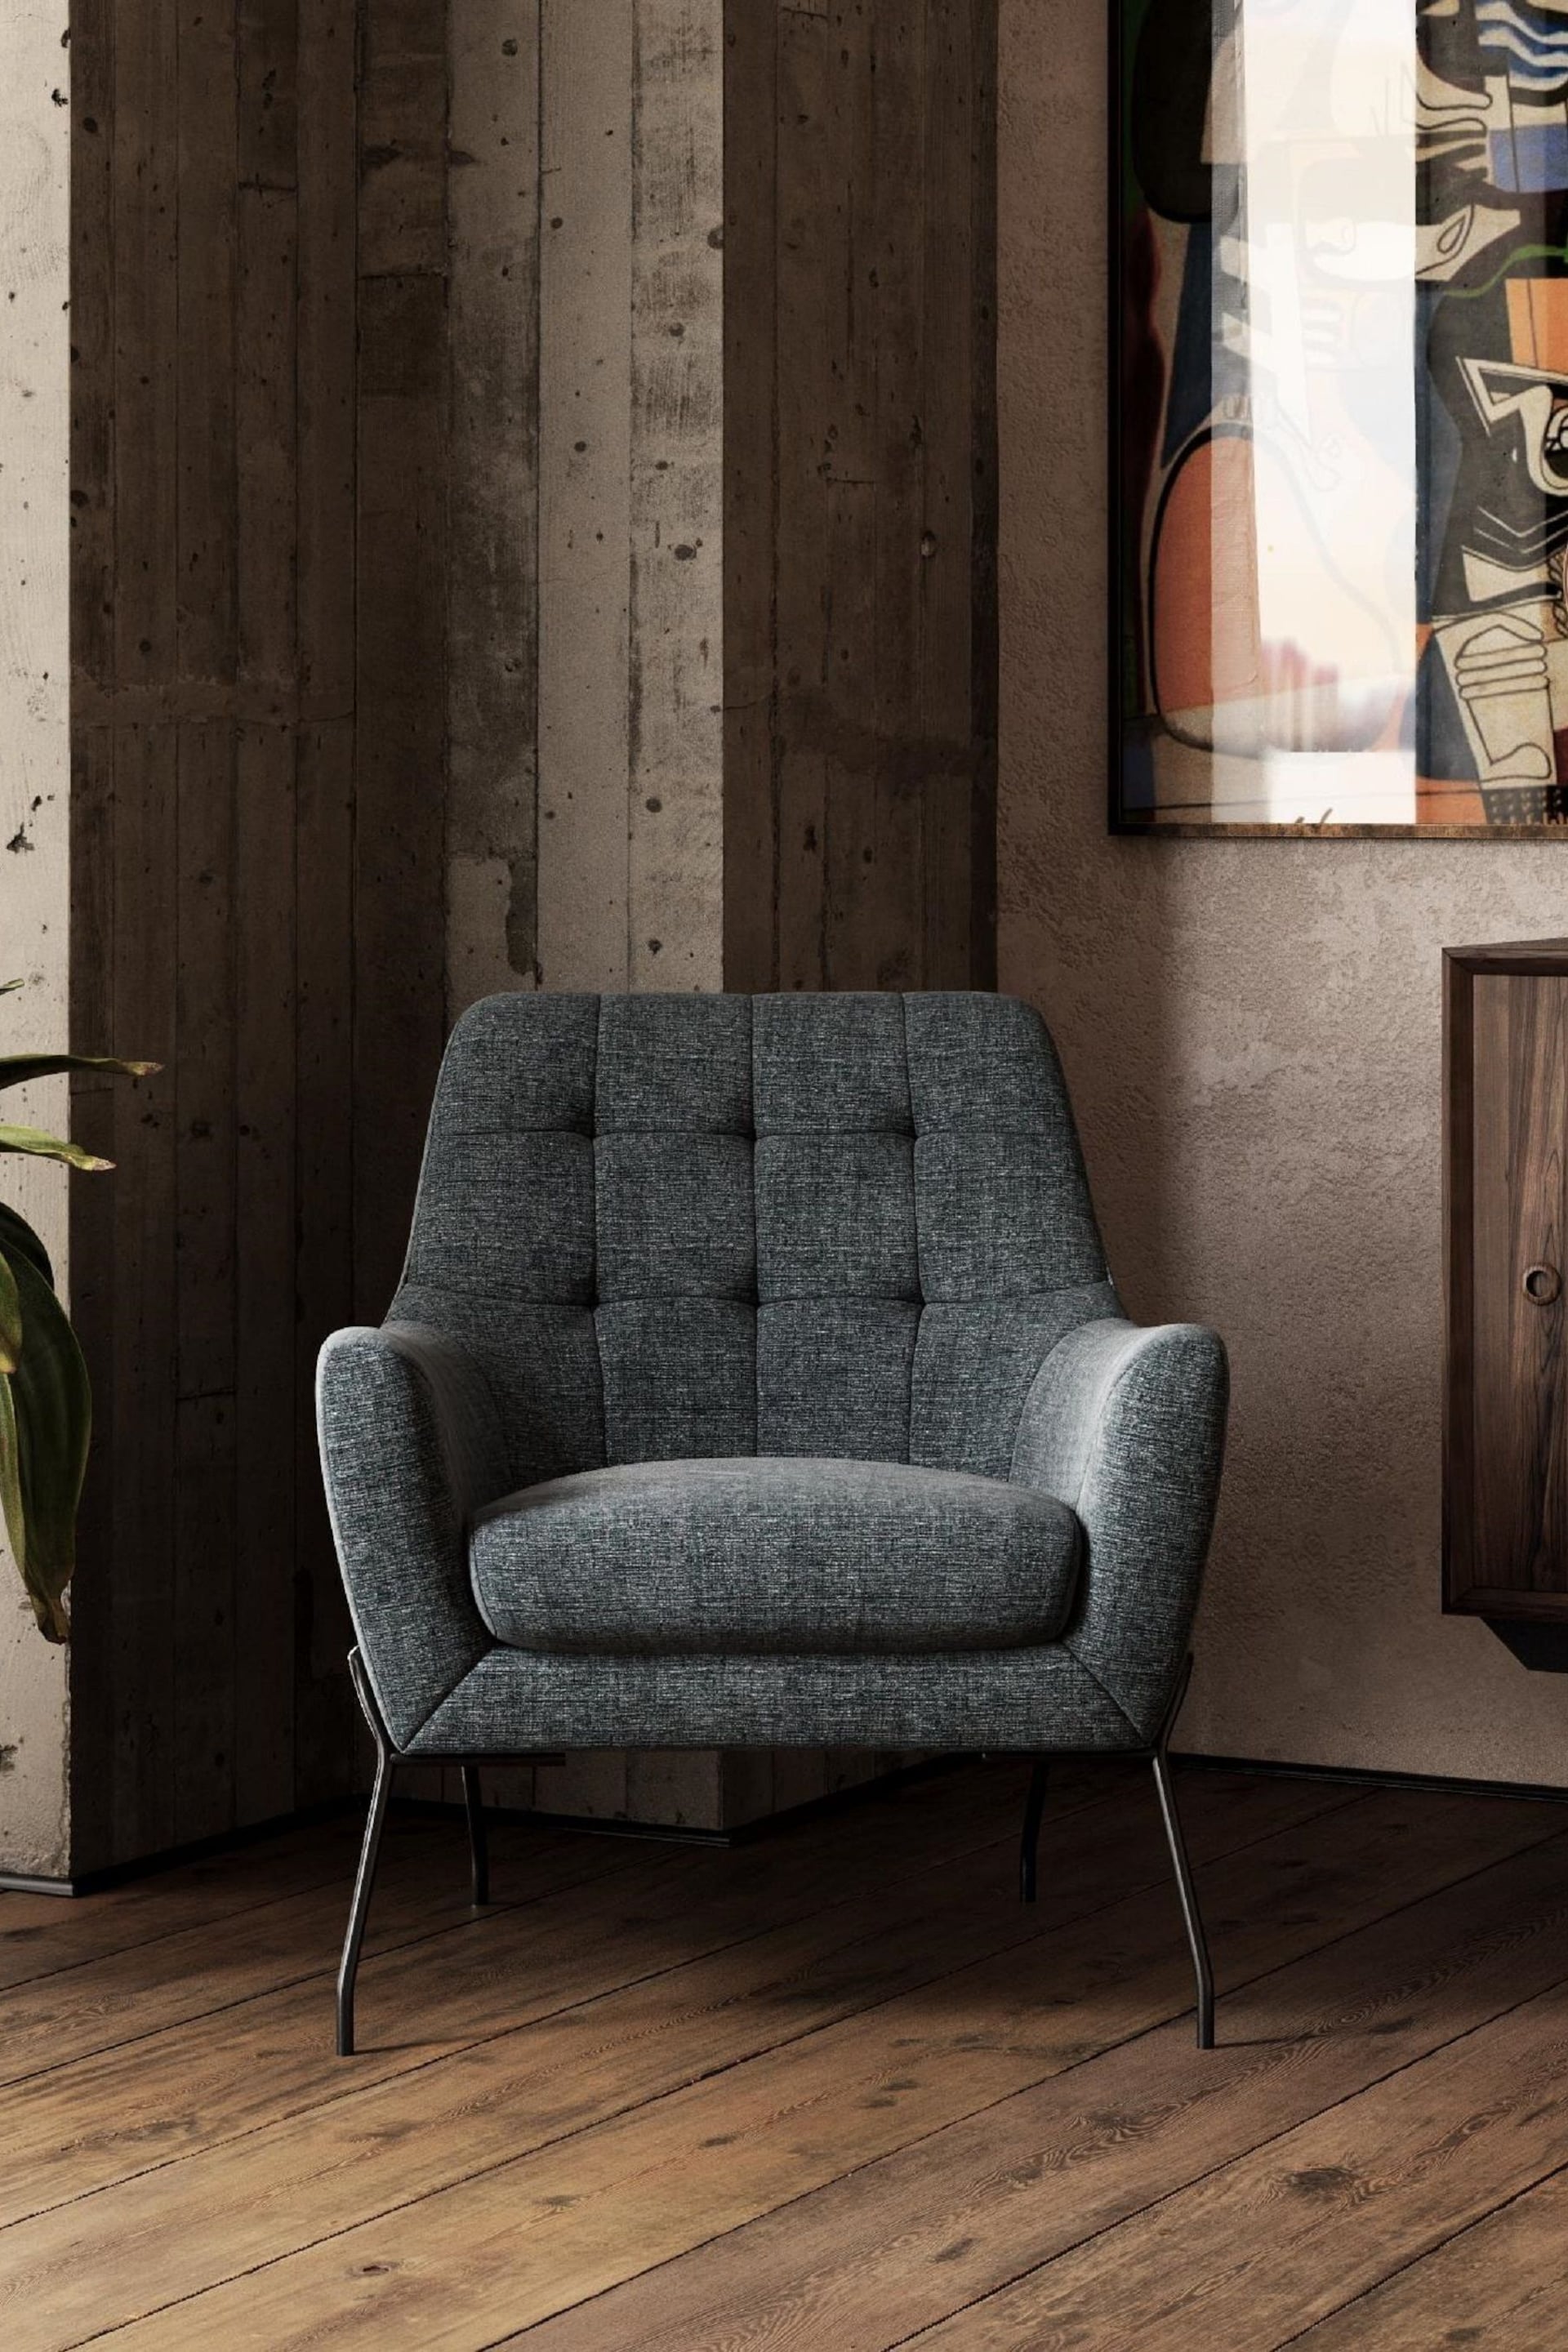 Dorel Home Grey Europe Brayden Accent Upholstered Chair - Image 1 of 4